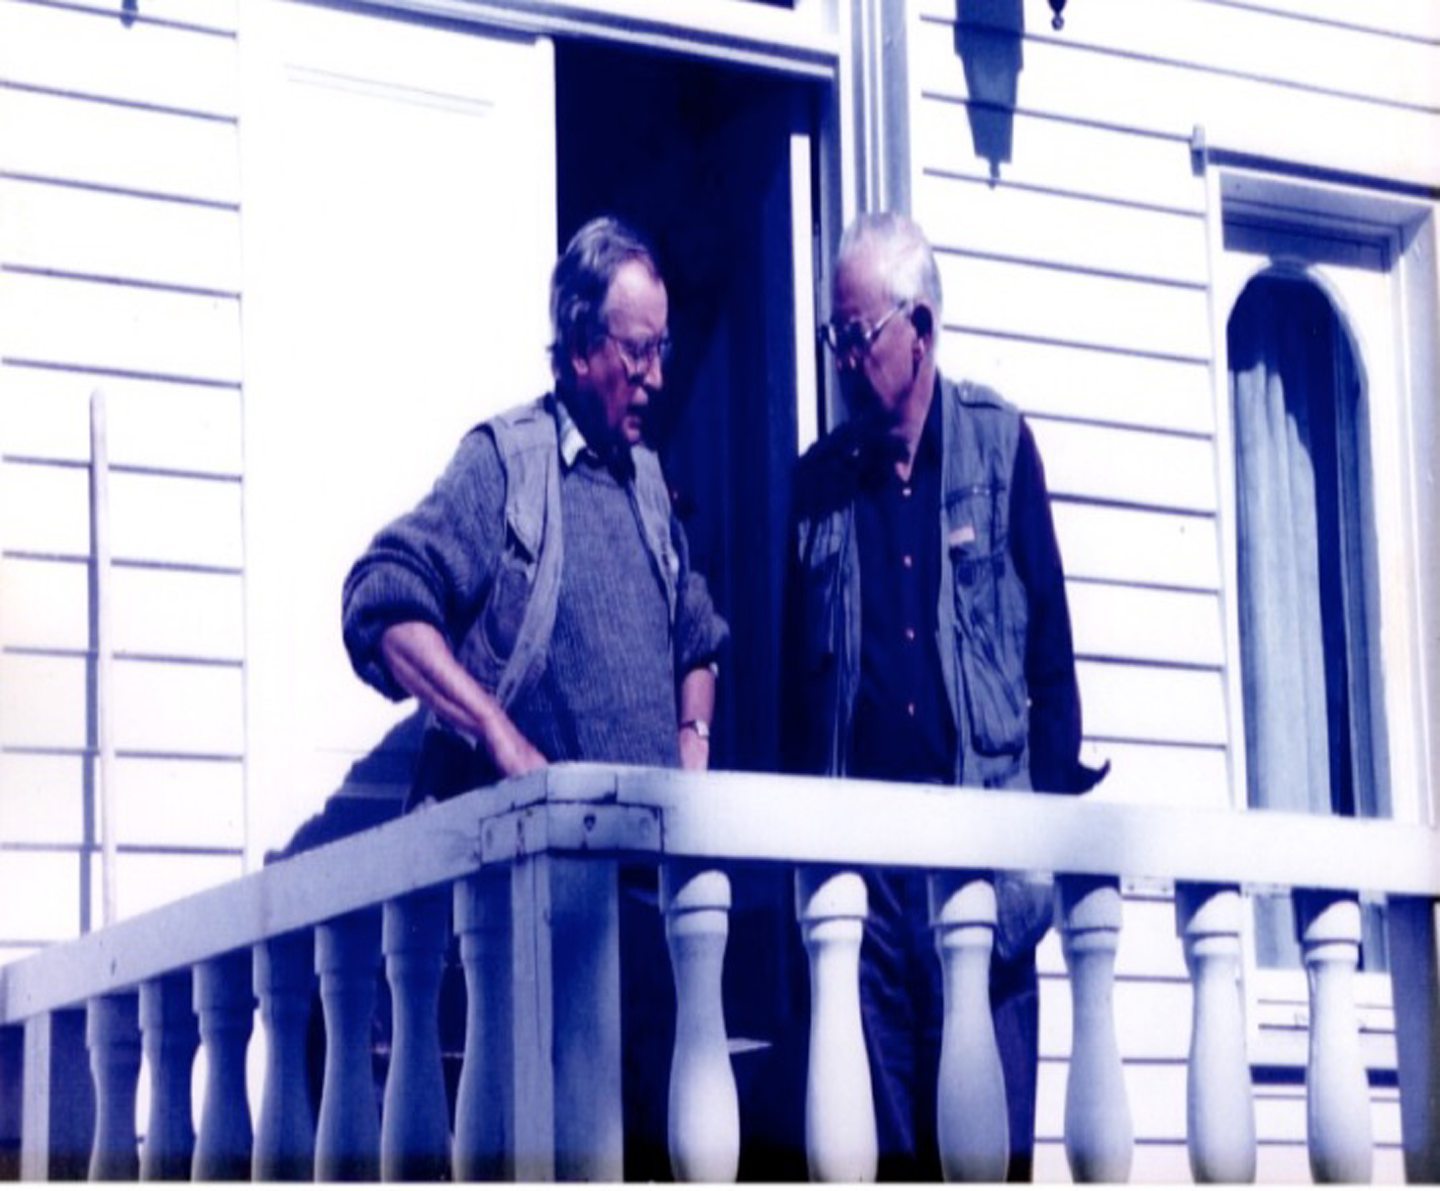 Professors Brian Sturt, left, and Professor Donald Ramsay at a mining cabin in Norway.